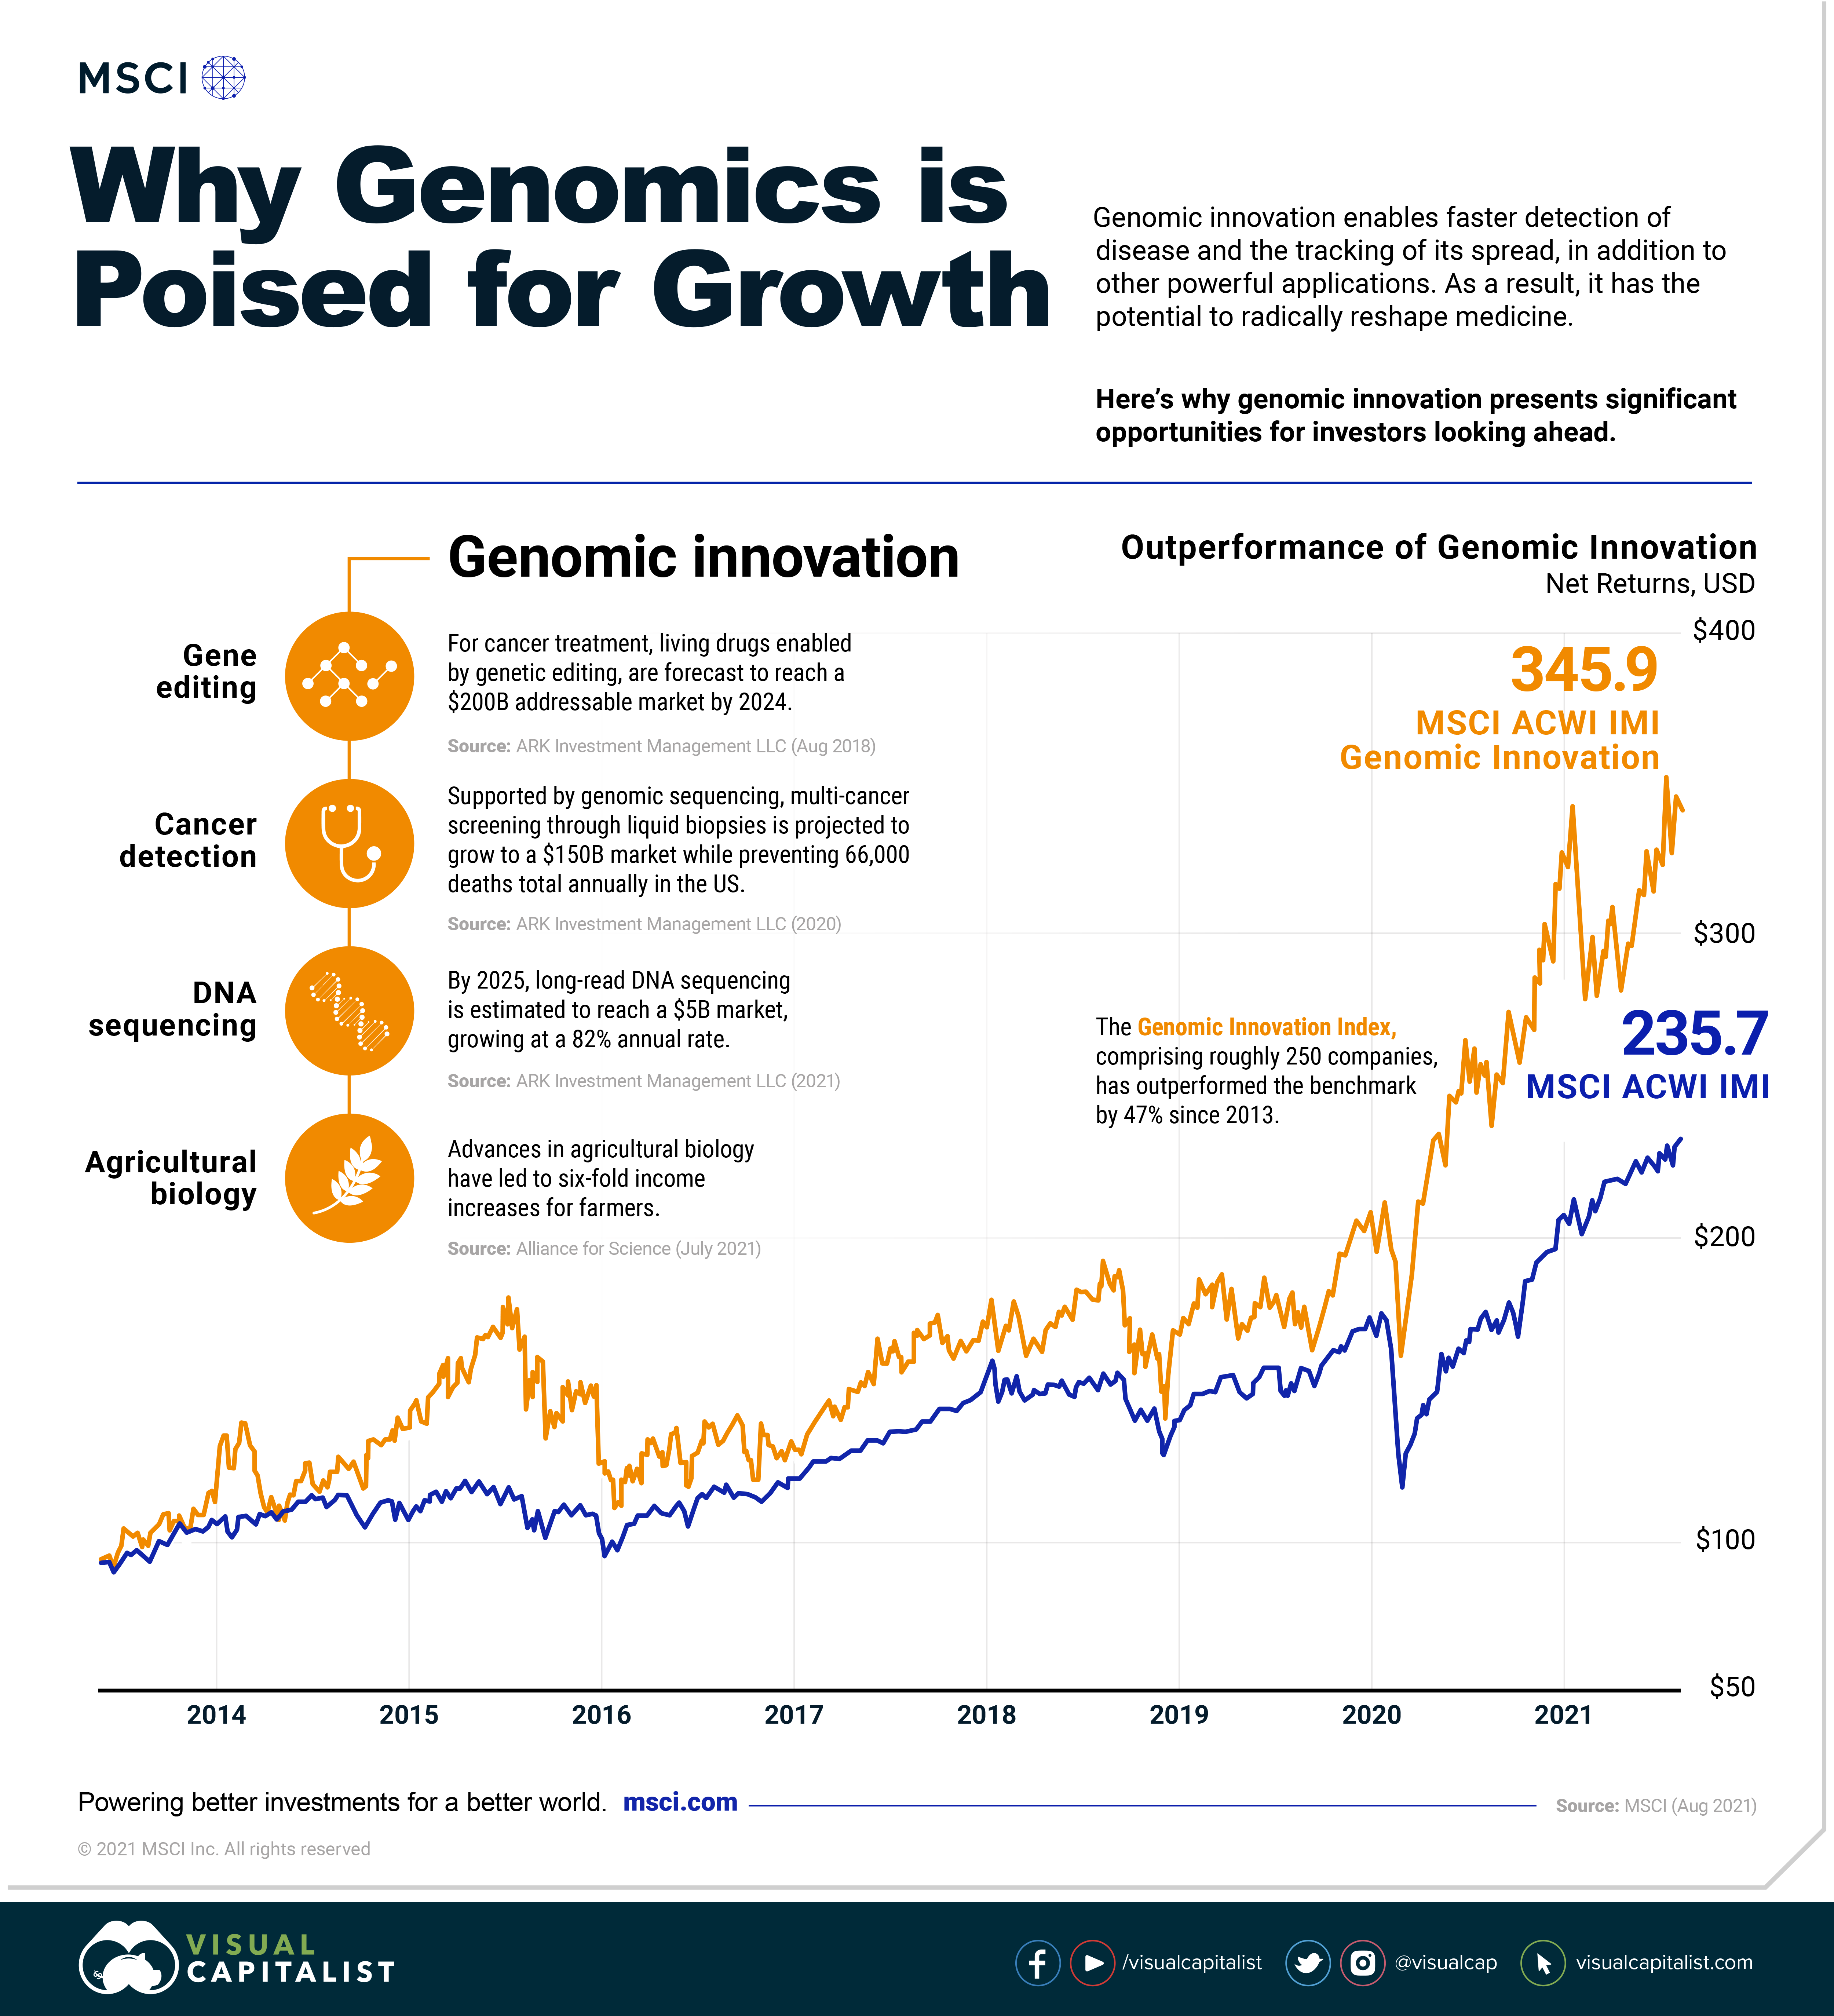 Why Genomics is poised for growth